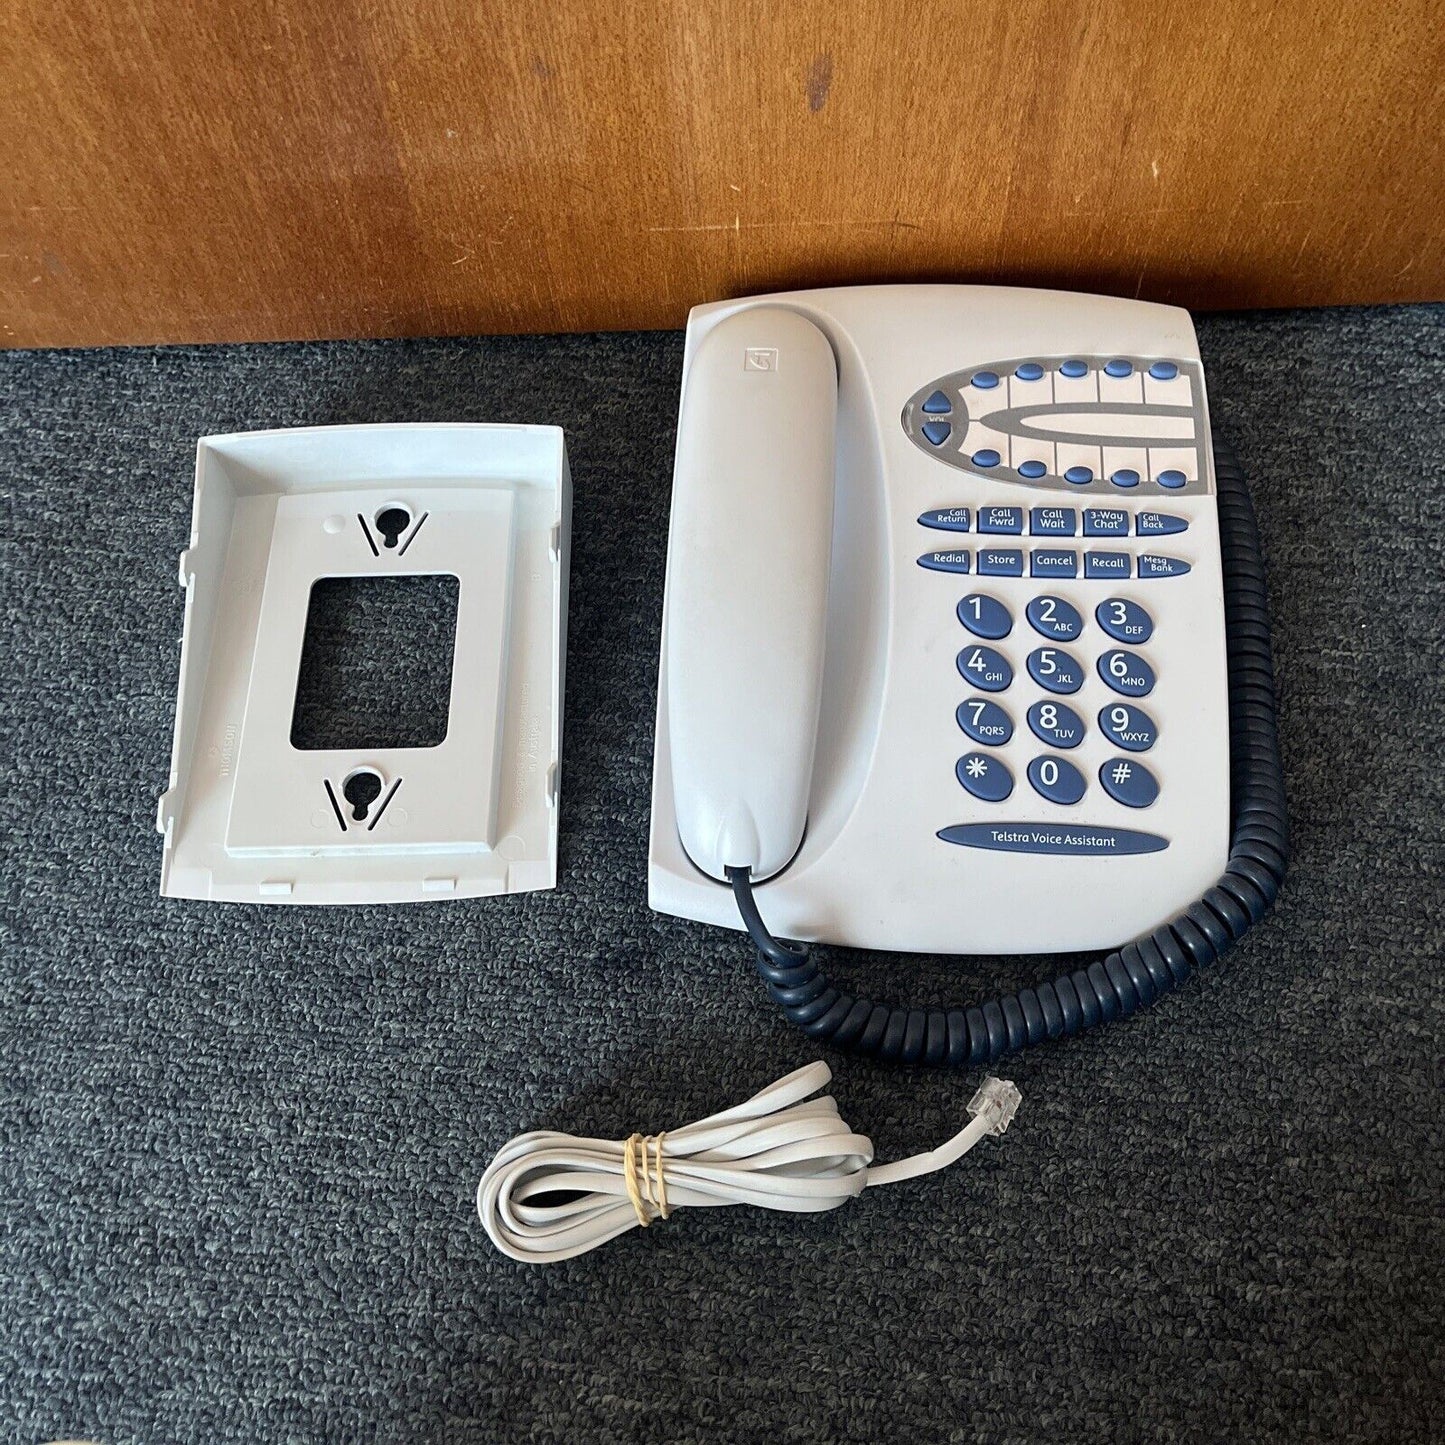 Telstra T1000S Landline Corded Telephone with Wall Mount